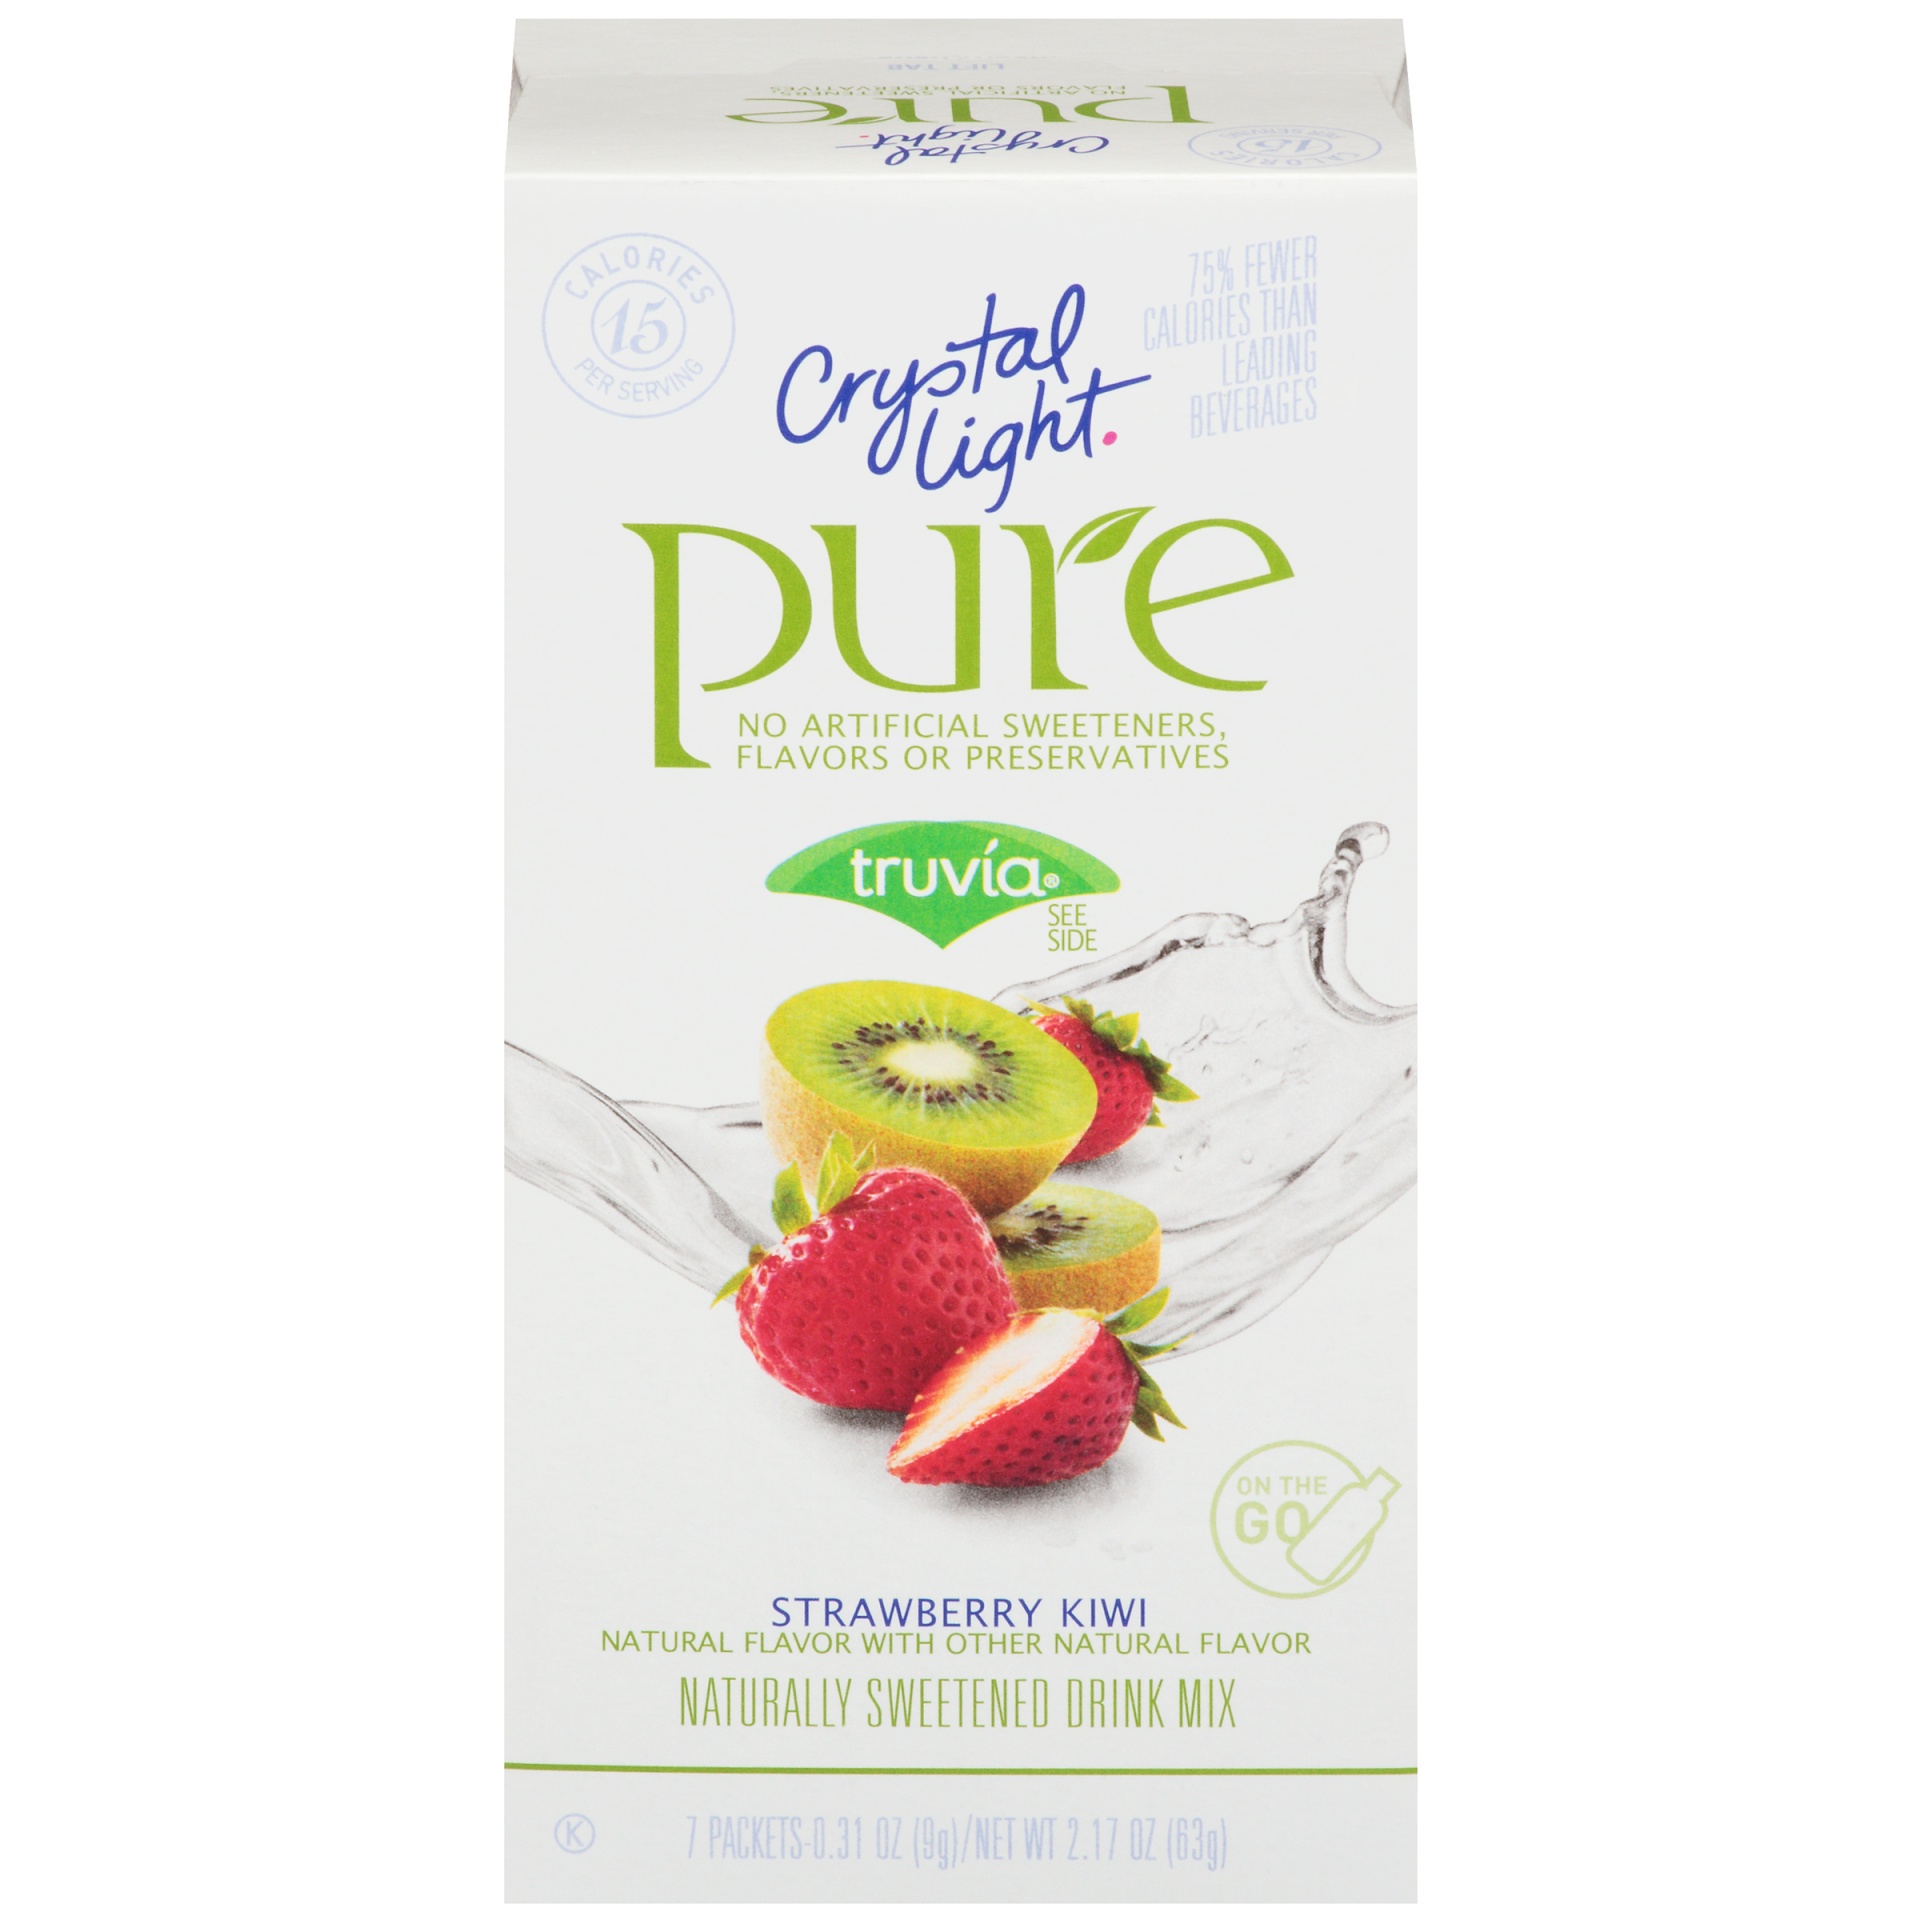 slide 1 of 6, Crystal Light Pure Fitness On the Go Strawberry Kiwi Naturally Sweetened Drink Mix, 7 ct